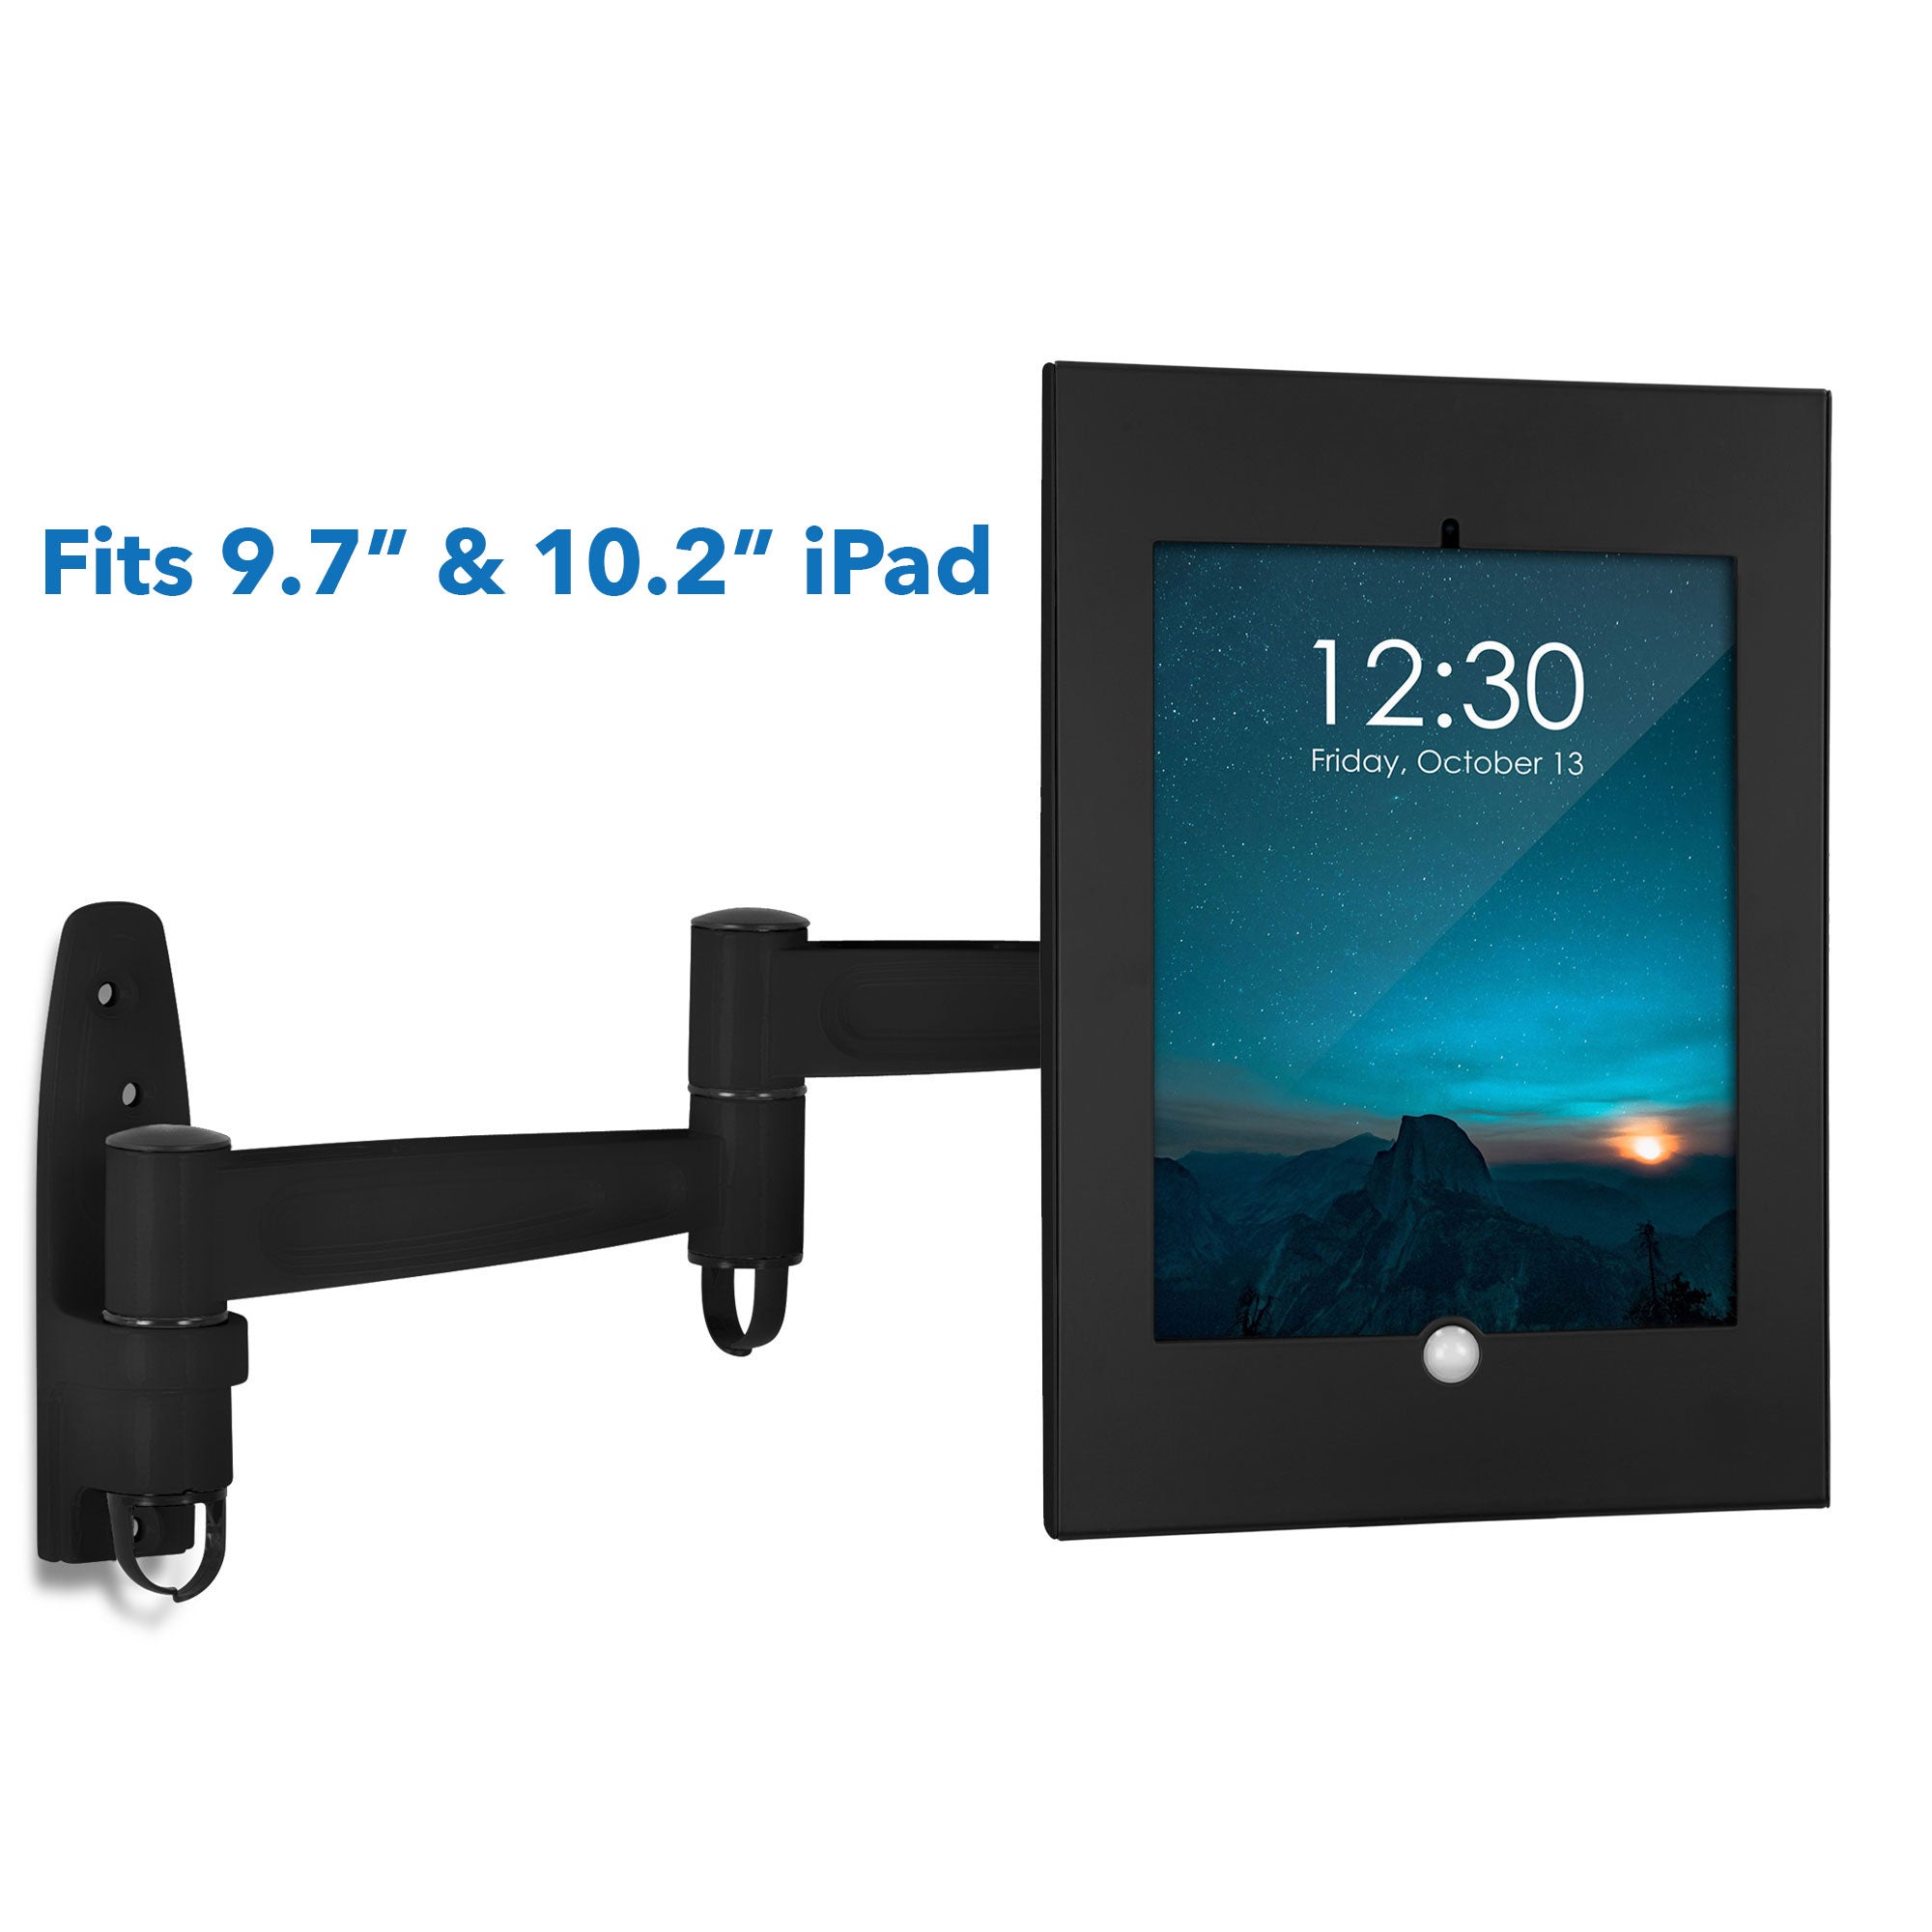 Secure iPad Wall Mount Enclosure w/ Swing Arm for iPad Generations 8 and 9